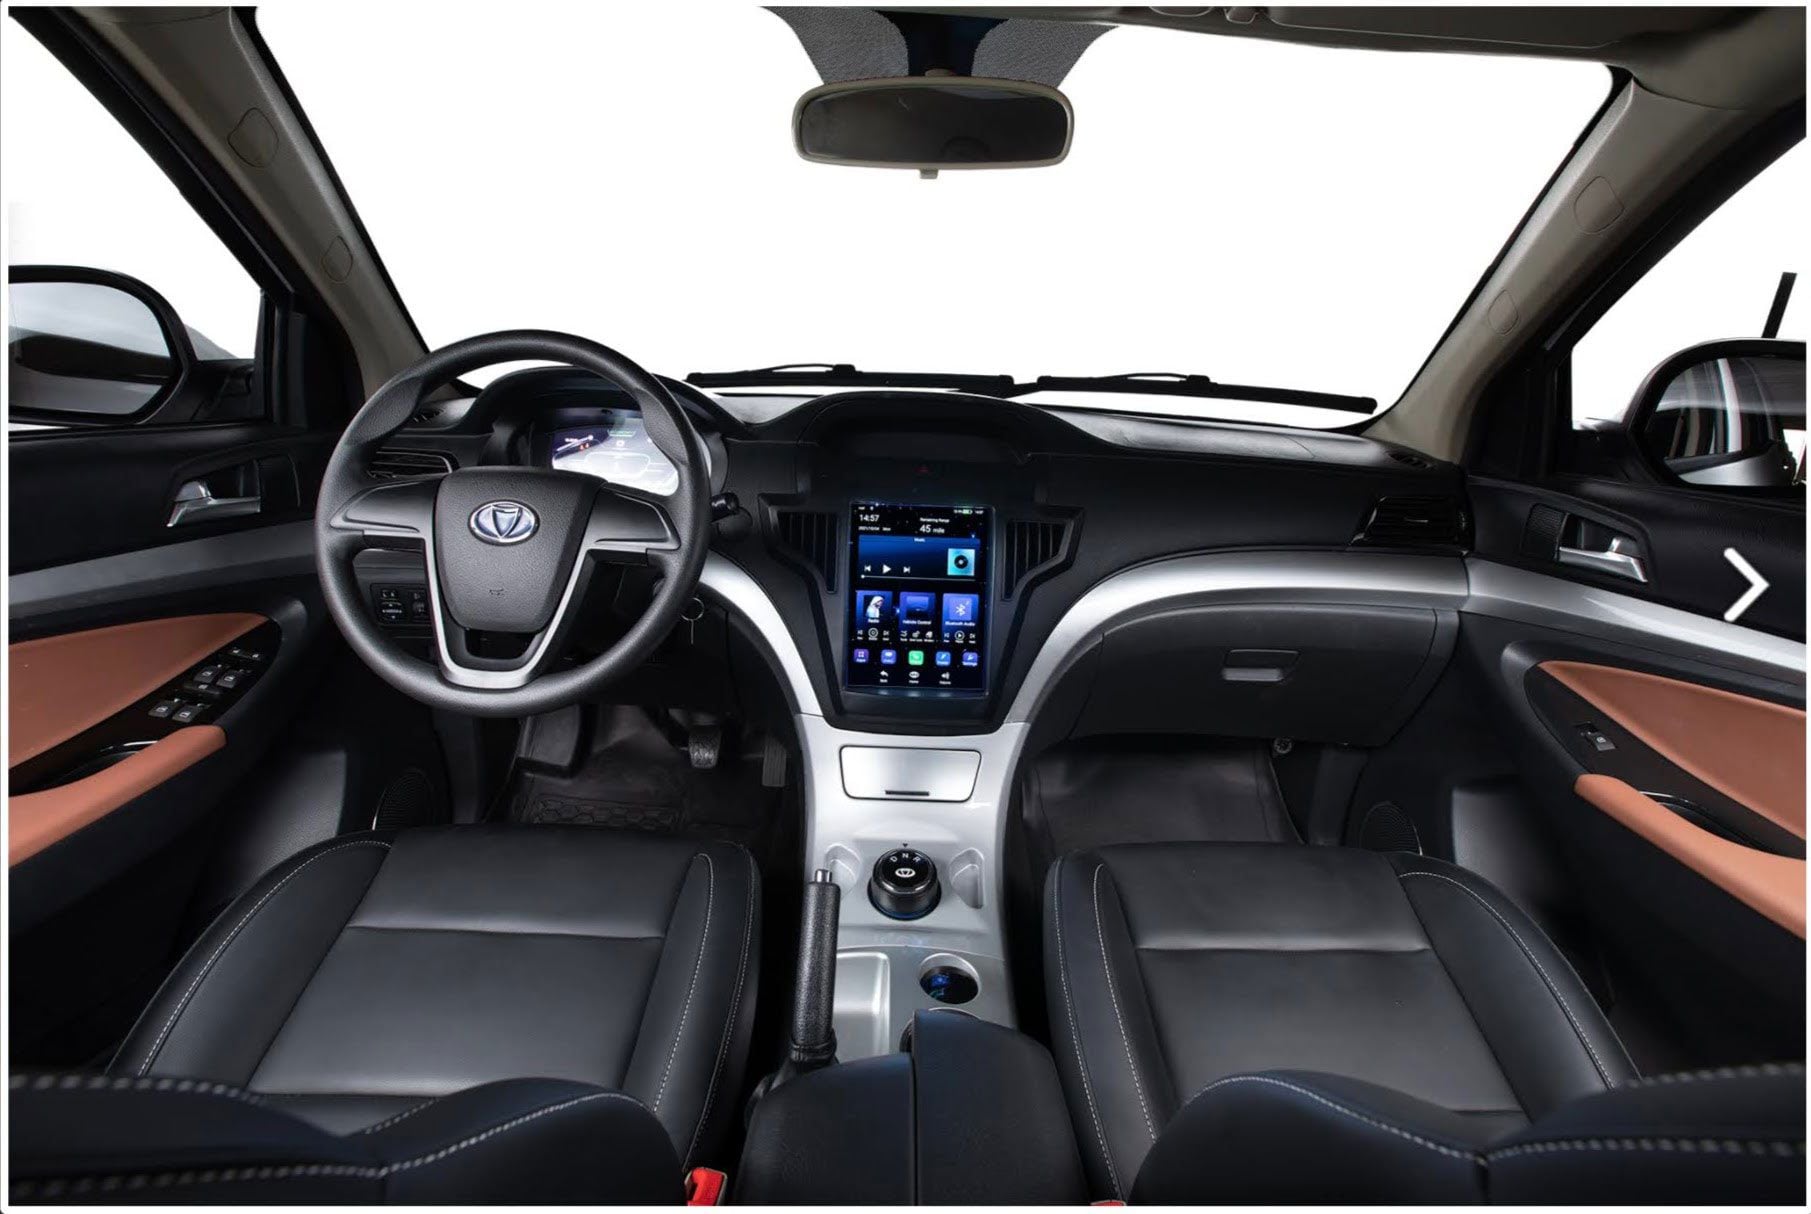 By UTV standards, the interior is bananas, with a 10-inch touchscreen, what appear to be leather seats, a backup camera, and speed-sensing locks.